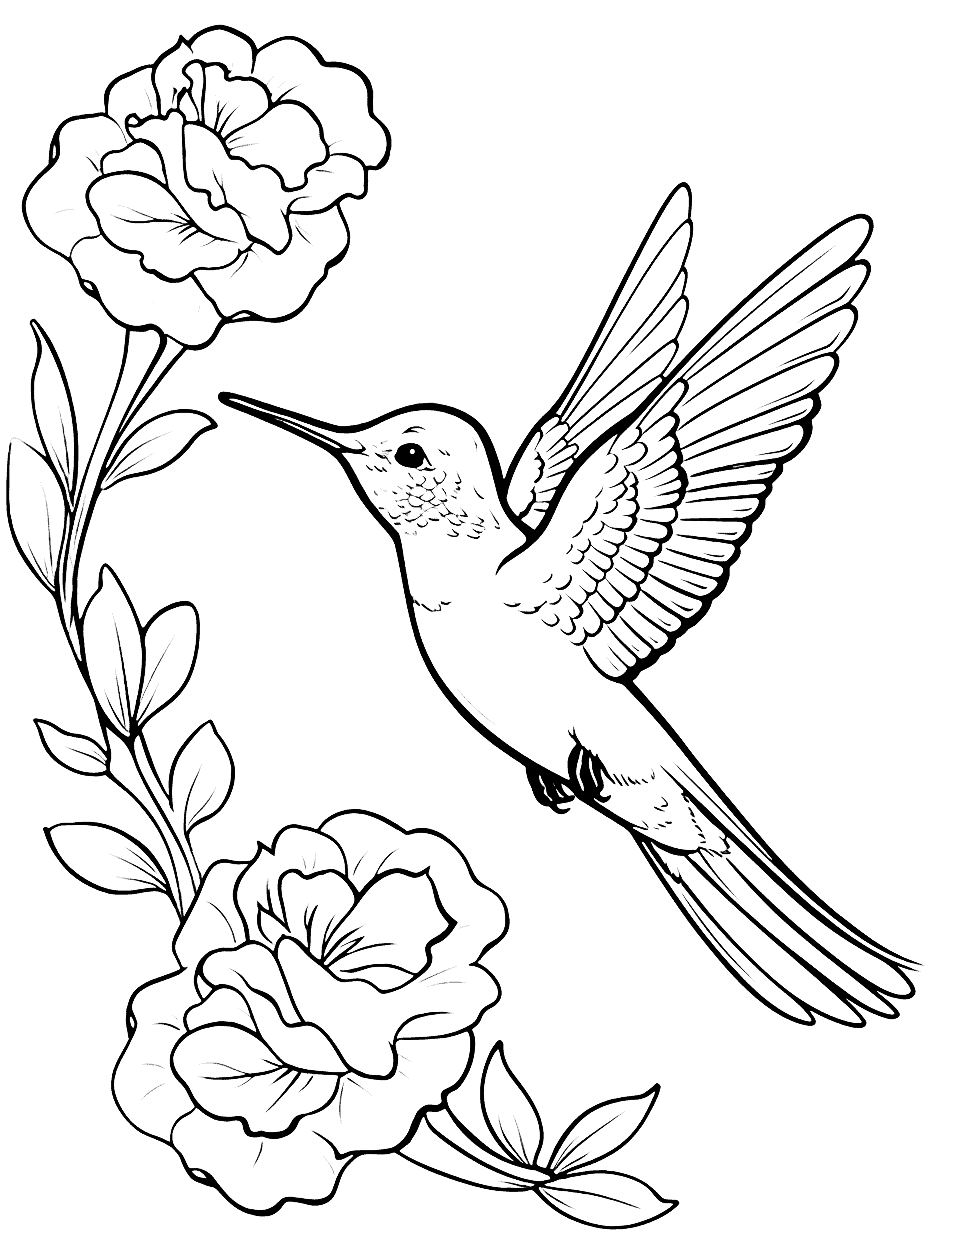 Detailed Hummingbird and Flowers Cute Coloring Page - A beautifully detailed hummingbird hovering near vibrant flowers.